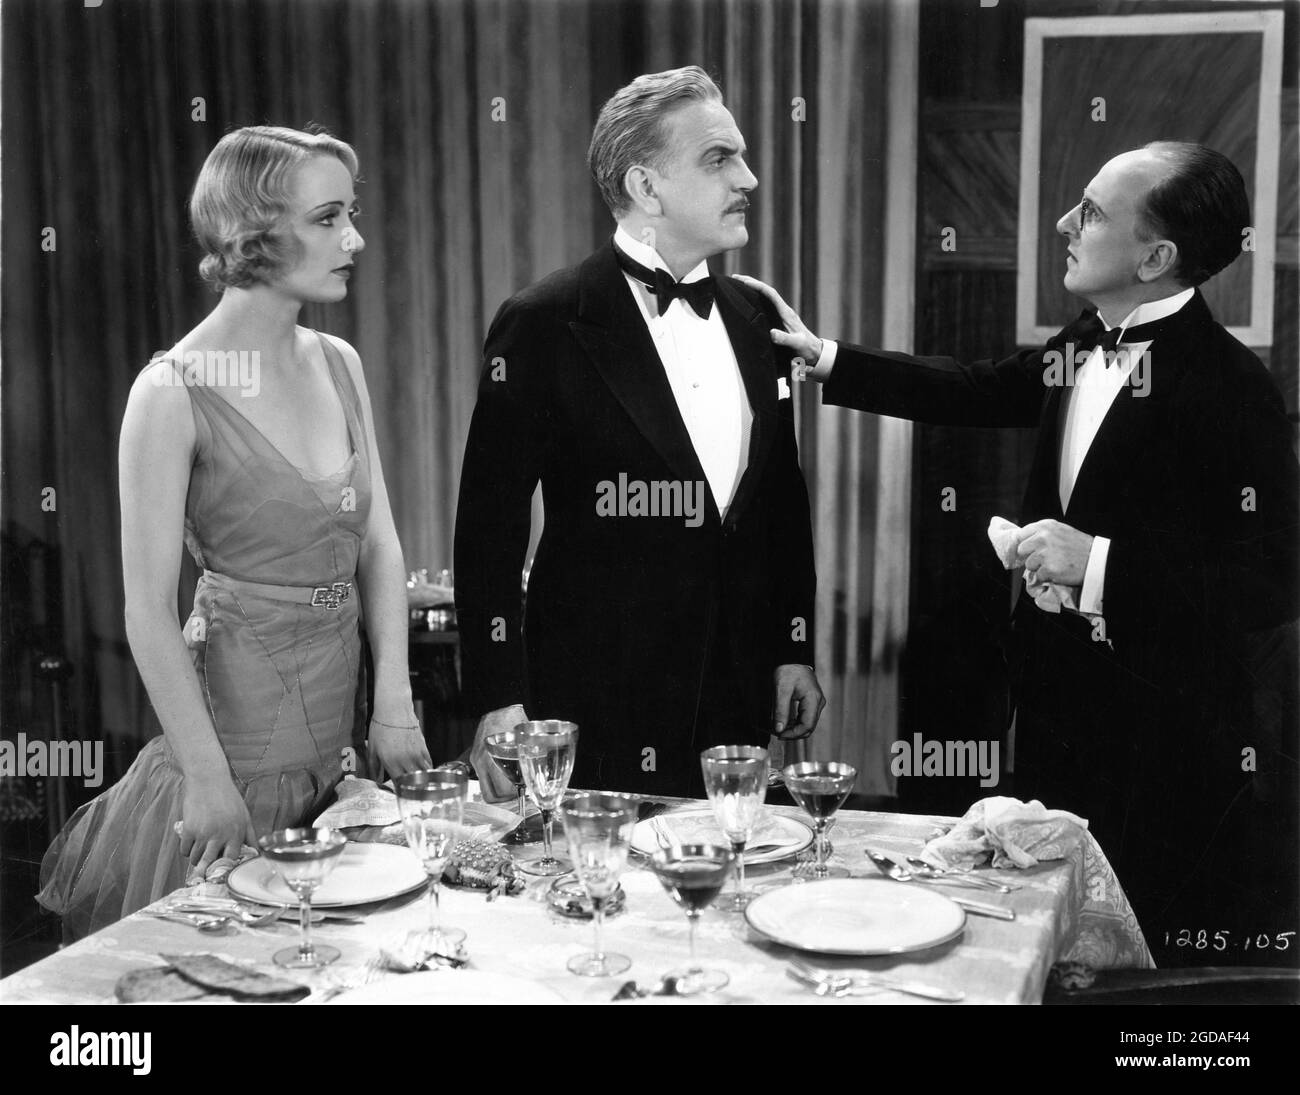 CAROLE LOMBARD FRANK MORGAN and BARRY O'MOORE in FAST AND LOOSE 1930 director FRED C. NEWMEYER story Doris Anderson and Jack Kirkland play The Best People by David Gray and Avery Hopwood dialogue Preston Sturges costume design Travis Banton Paramount Pictures Stock Photo